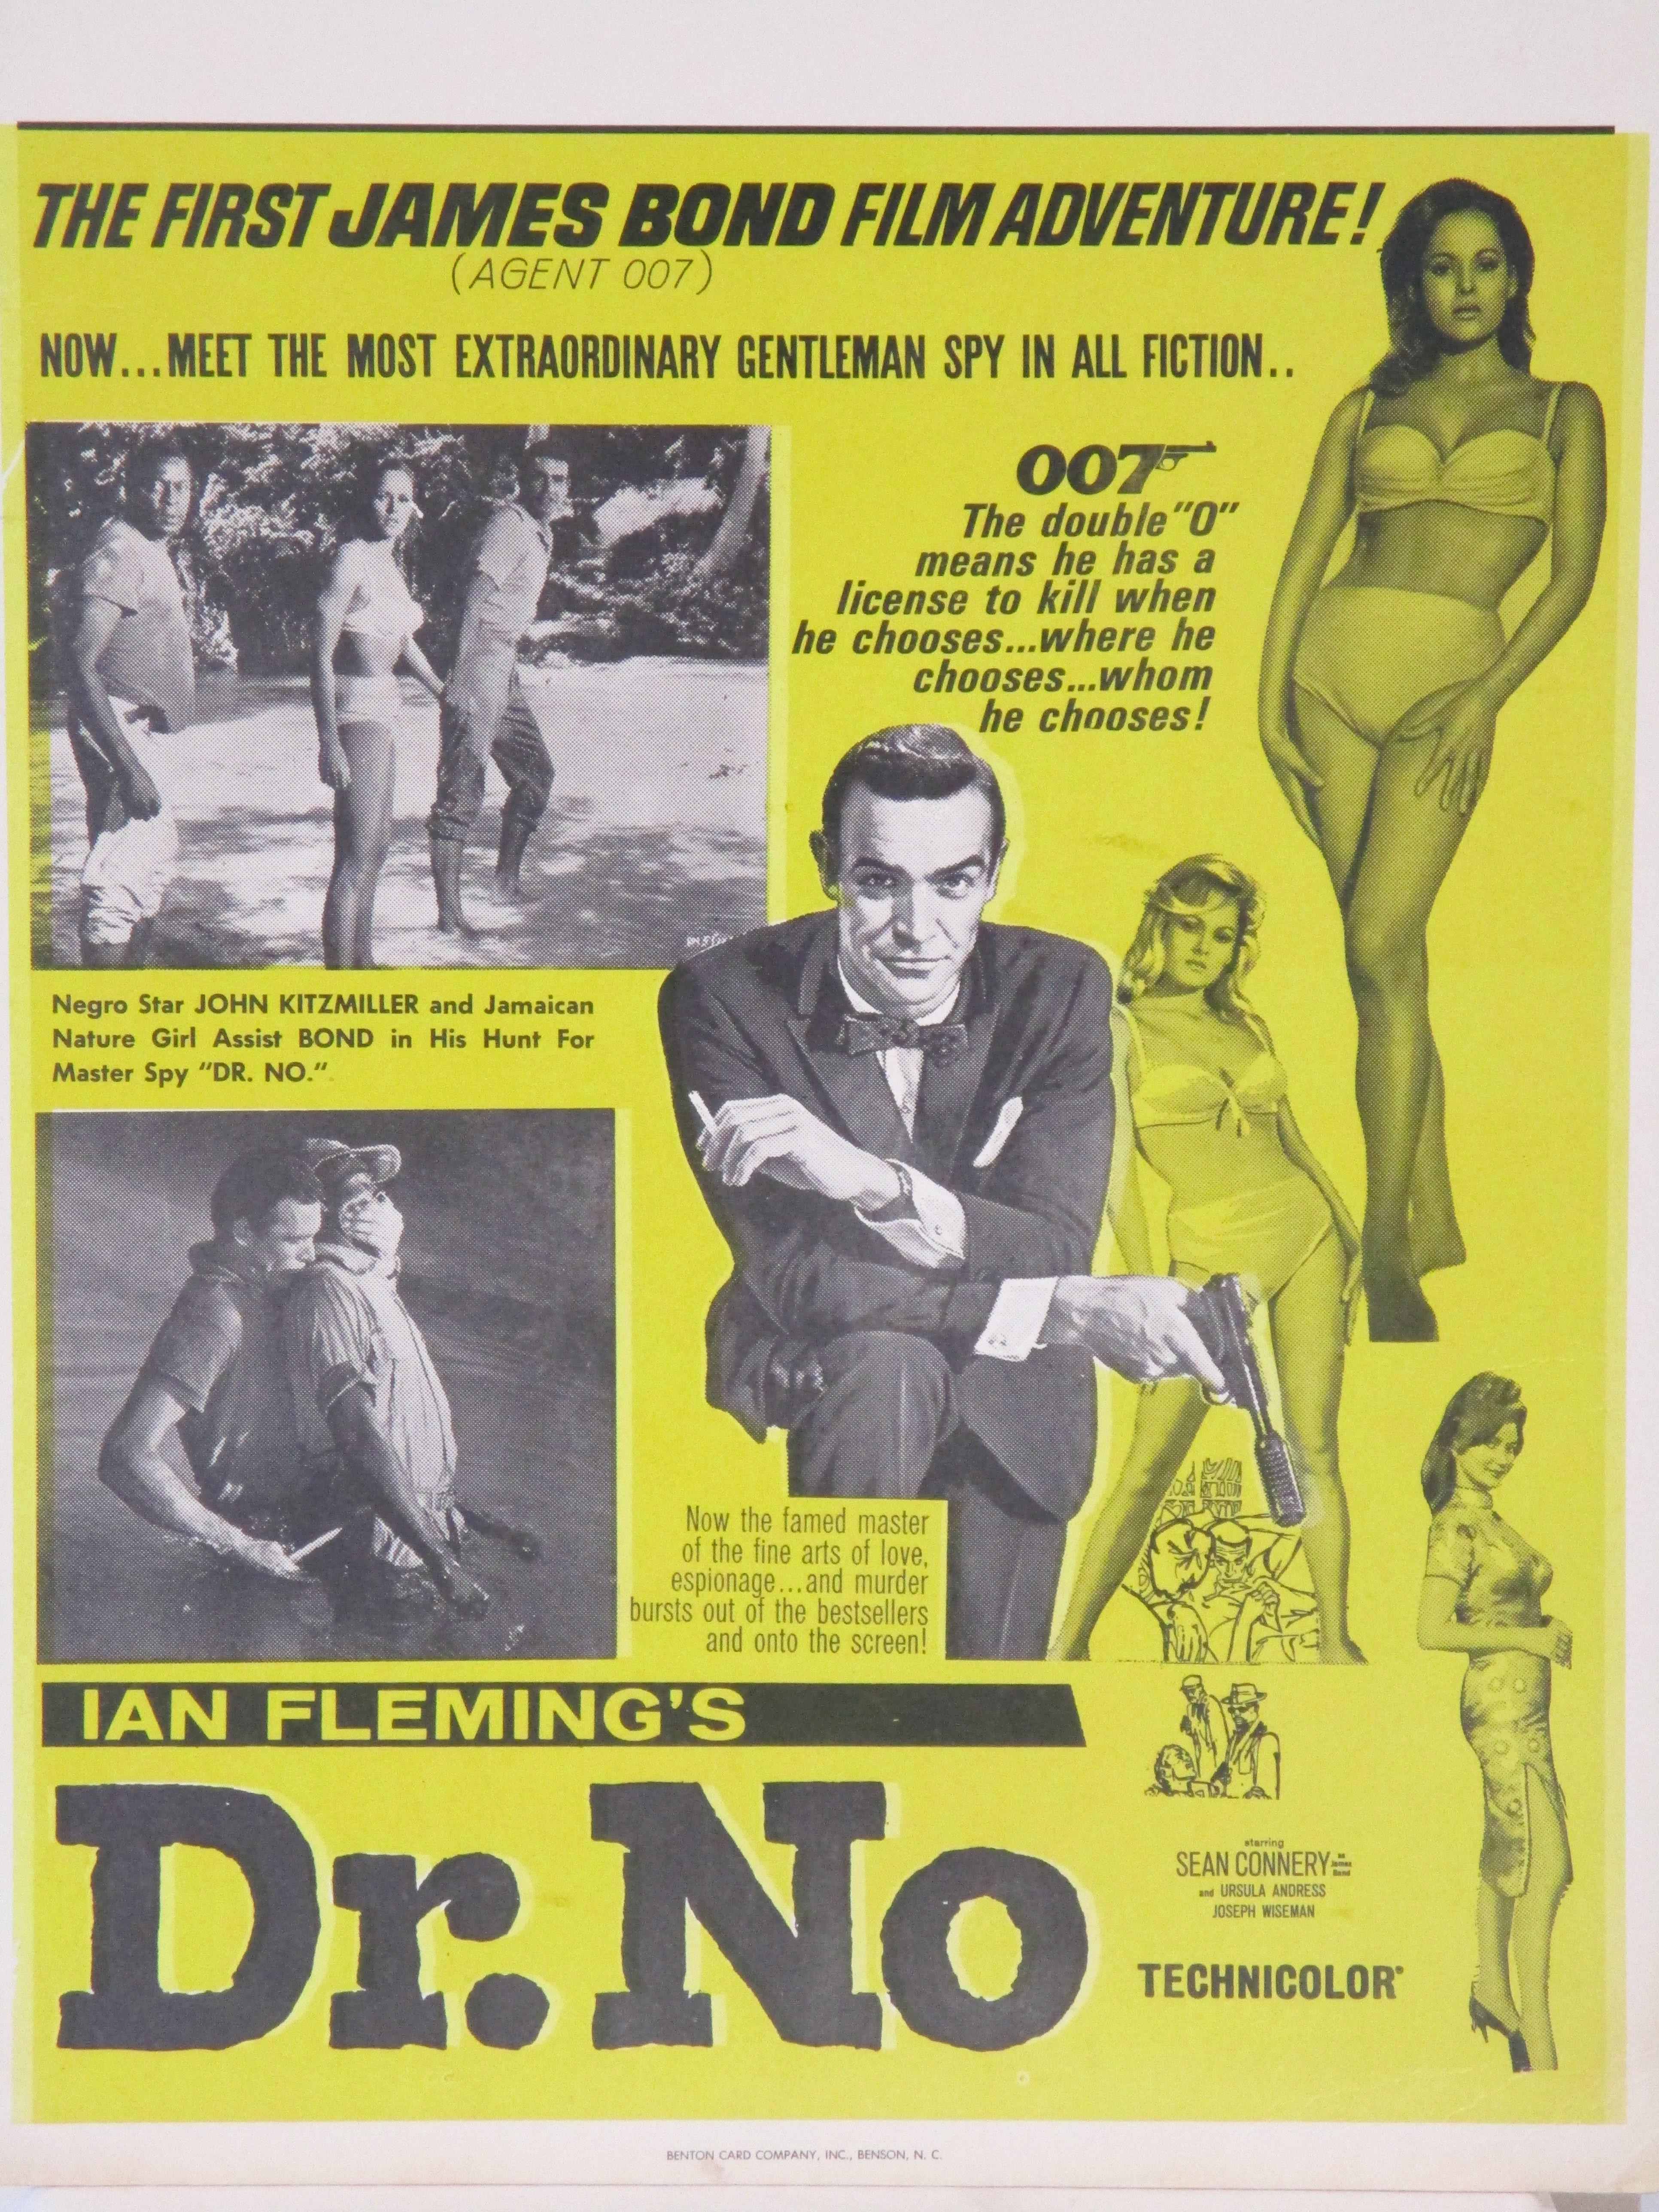 An early original advertising window card for the first James Bond movie staring Sean Connery which lead the bond franchise into movie history . Used in smaller southern towns as a cheaper way to advertise the film the upper part was to have the